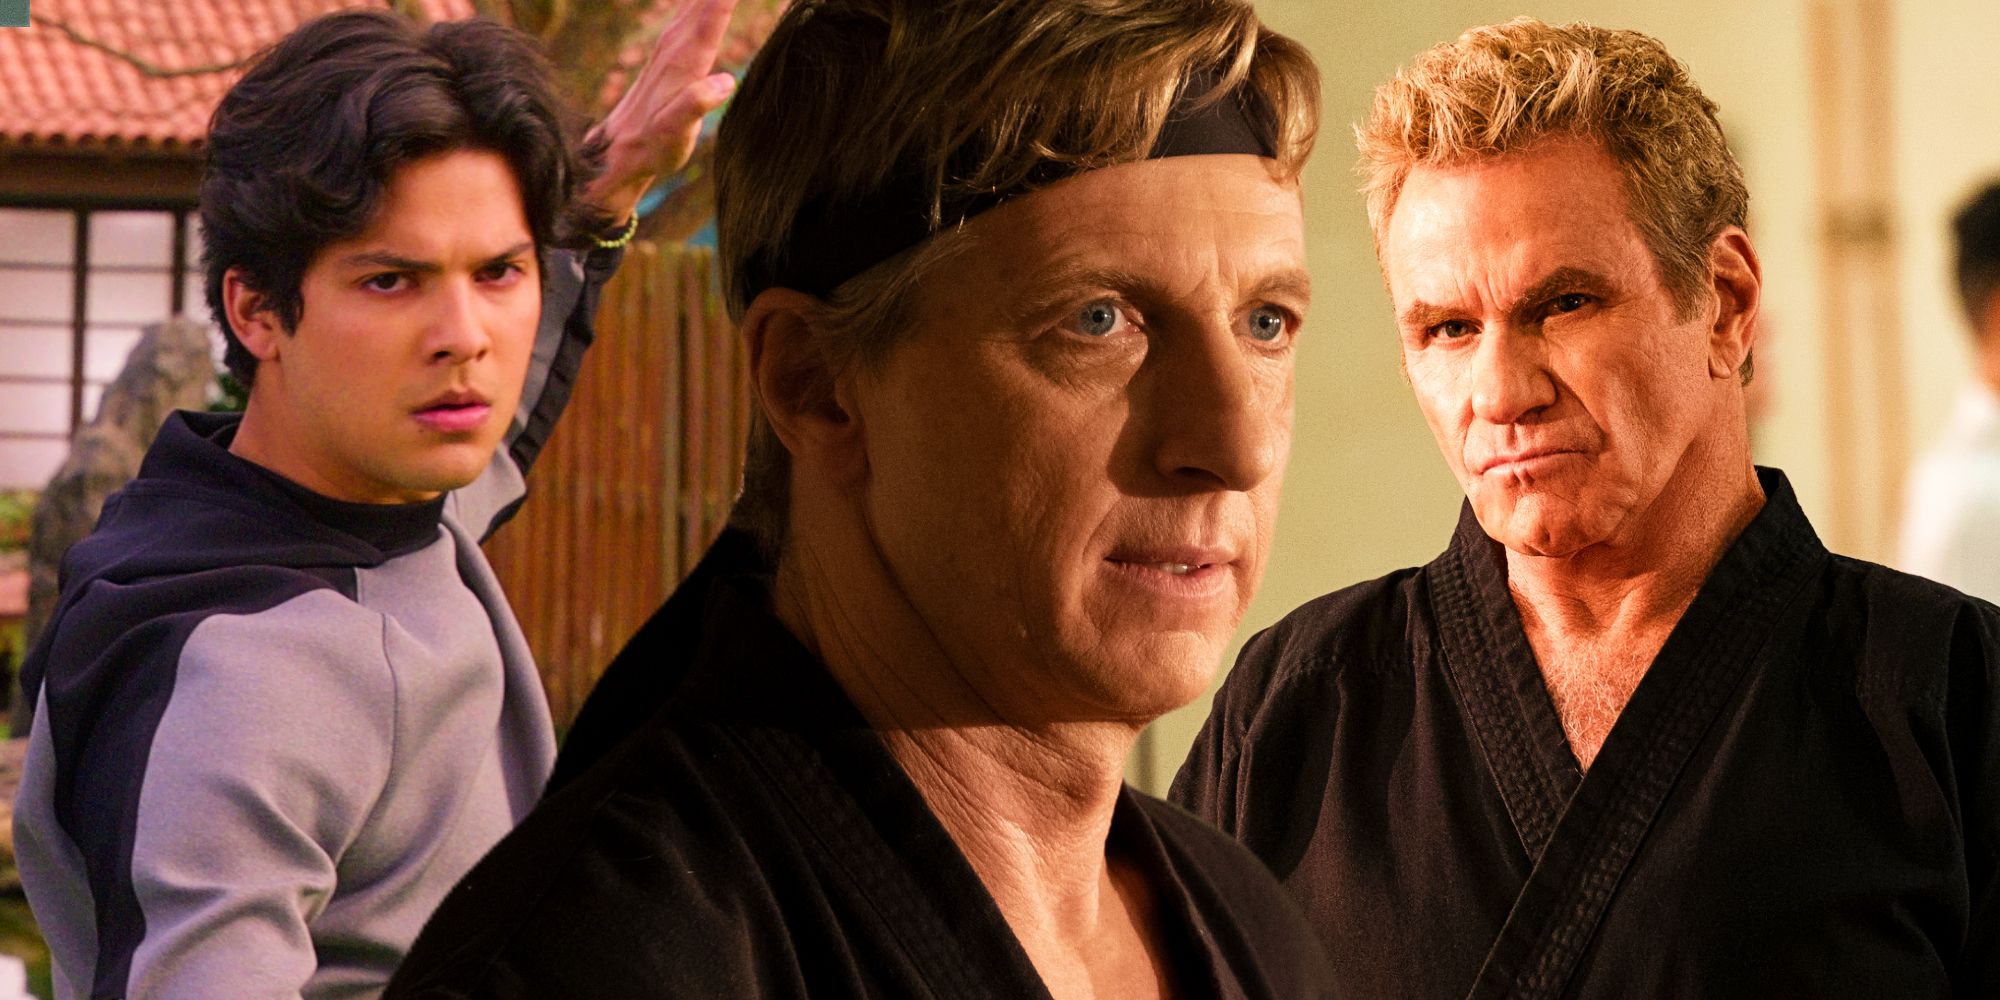 Cobra Kai's Miguel, Kreese, and Johnny Lawrence